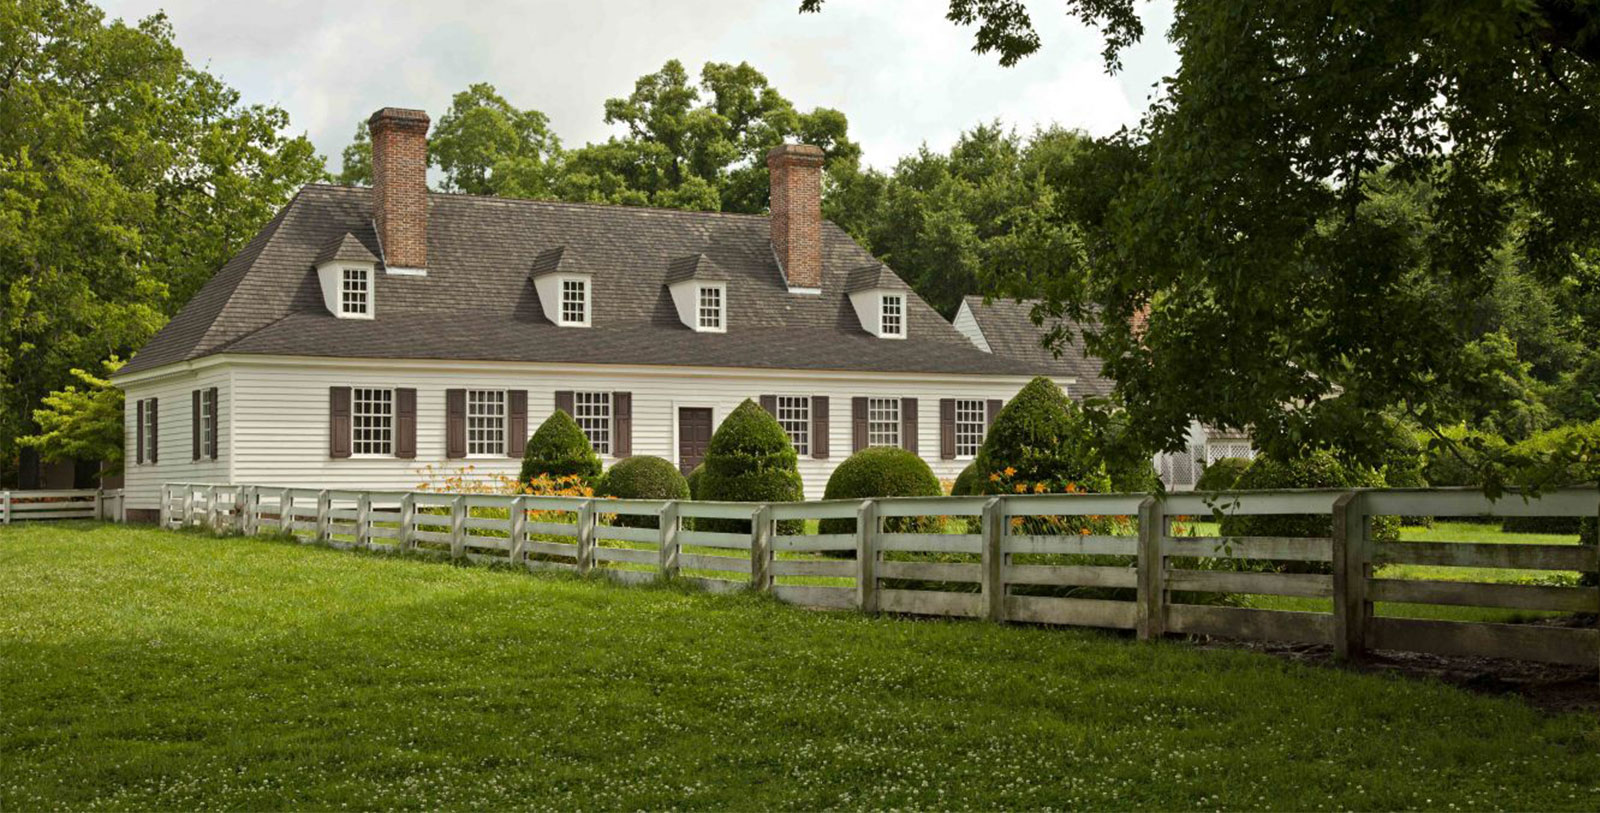 Williamsburg Lodge, Autograph Collection, and Colonial Houses, 1750, Member of Historic Hotels of America, in Williamsburg Virginia